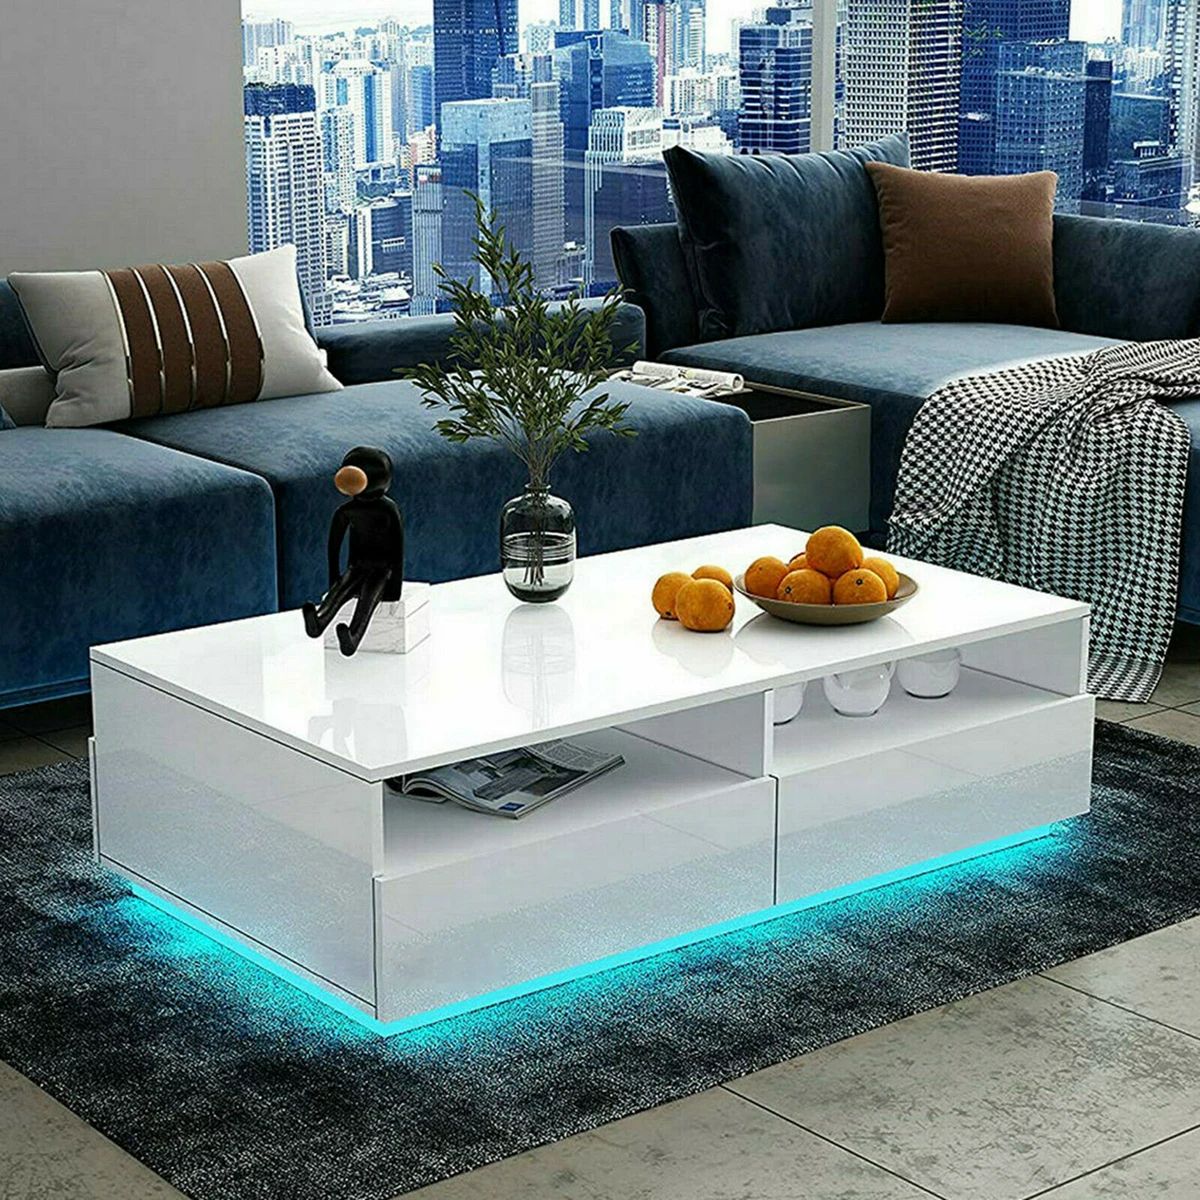 Rgb Led Coffee Table High Gloss Simple Design Side Table For Living Room  Furniture Tea Table Desks Home Storage Organzier – Aliexpress In Coffee Tables With Led Lights (View 12 of 15)